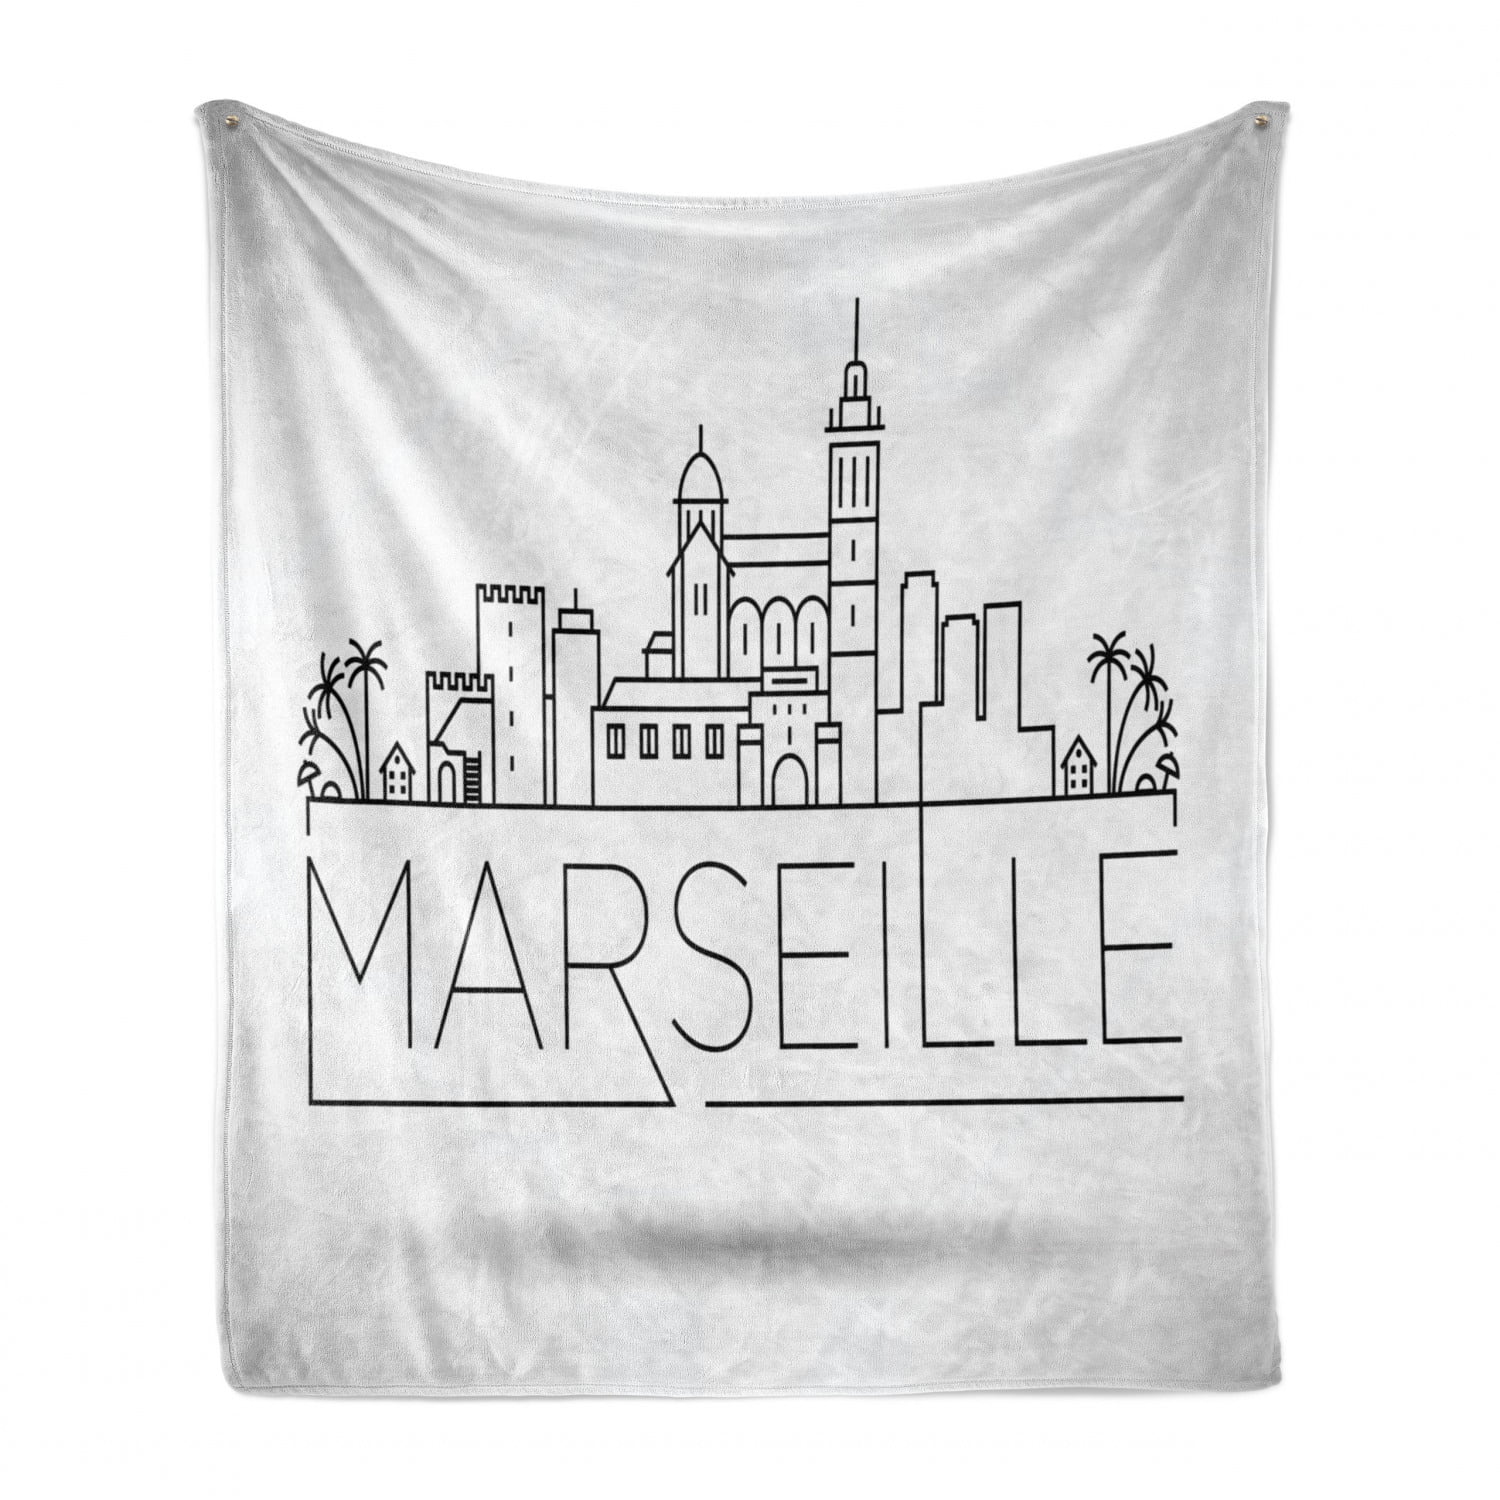 Linear Art Skyline Illustration of Marseille in Typographic Design White and Charcoal Grey Cozy Plush for Indoor and Outdoor Use Ambesonne France Soft Flannel Fleece Throw Blanket 50 x 70